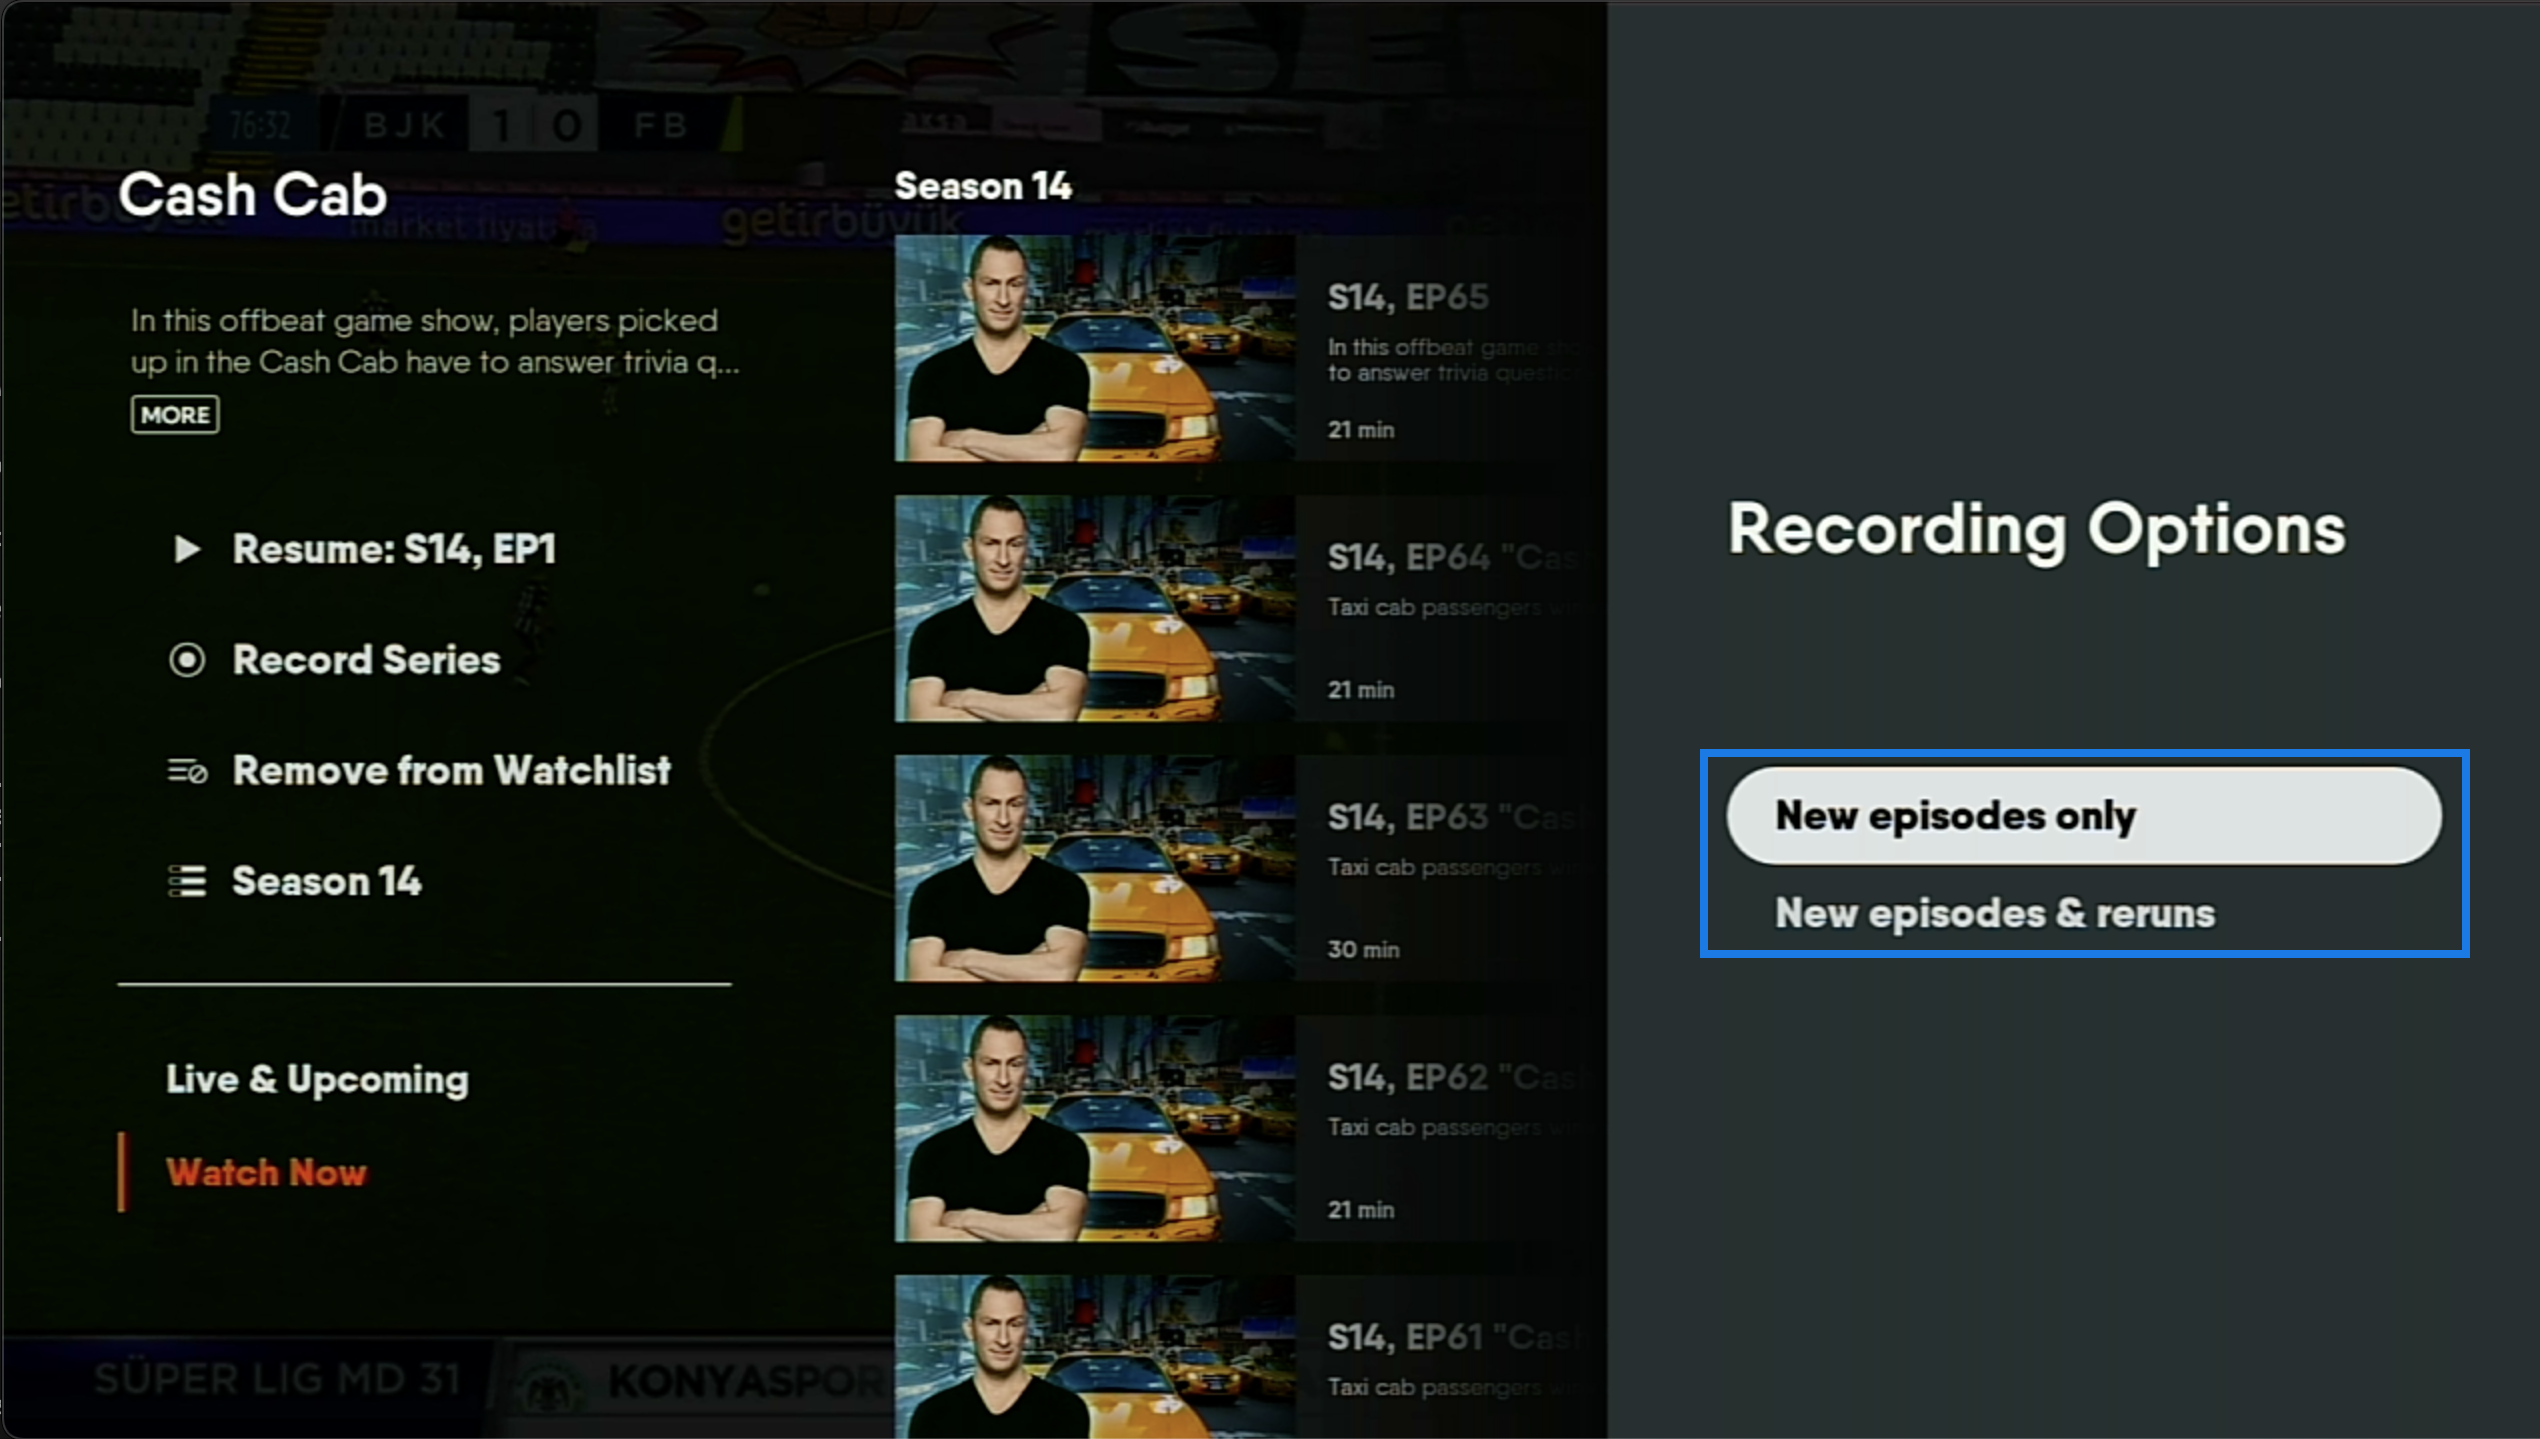 Series details page of the FuboTV app on Roku with recording options shown on the left and options highlighted